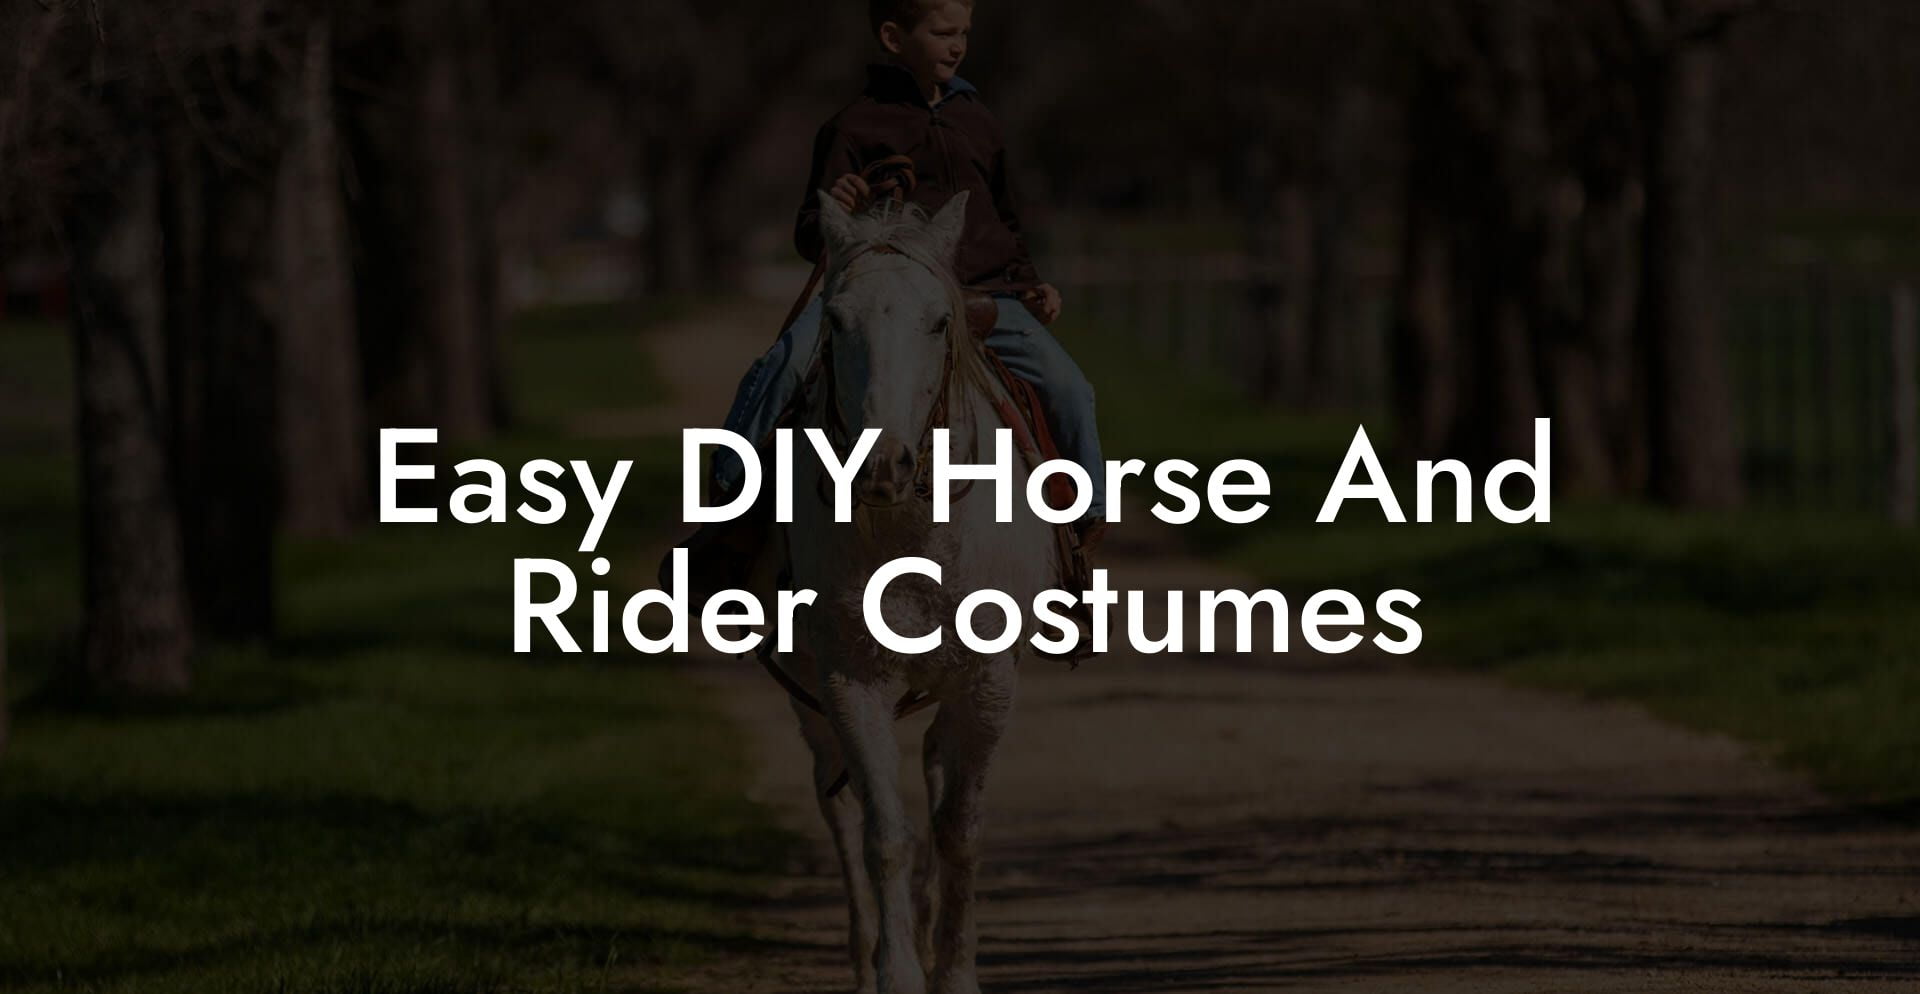 Easy DIY Horse And Rider Costumes